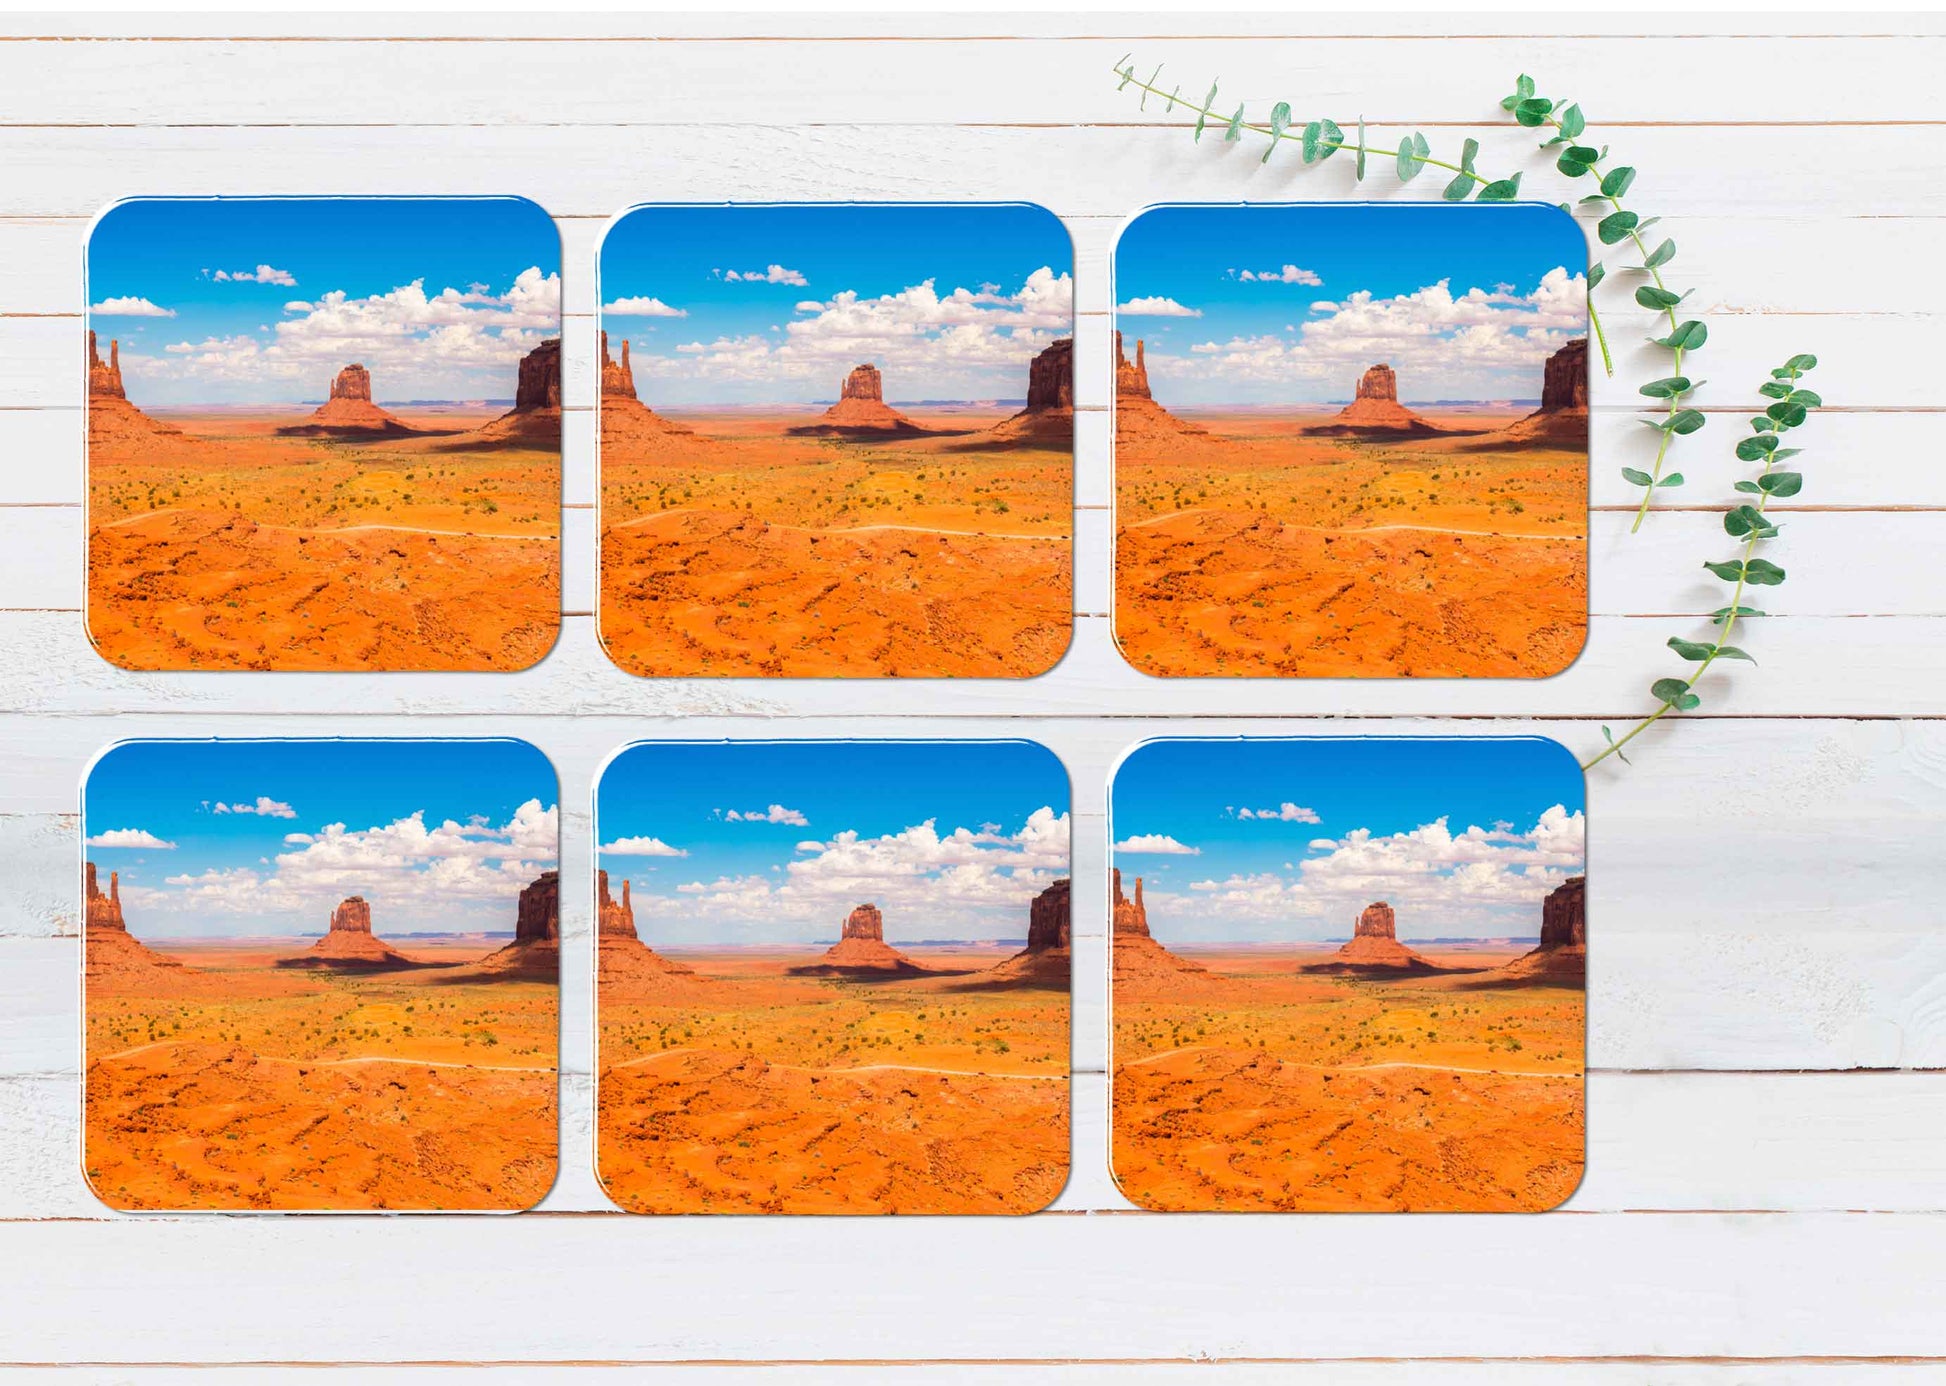 Monument Valley on The USA Border Coasters Wood & Rubber - Set of 6 Coasters